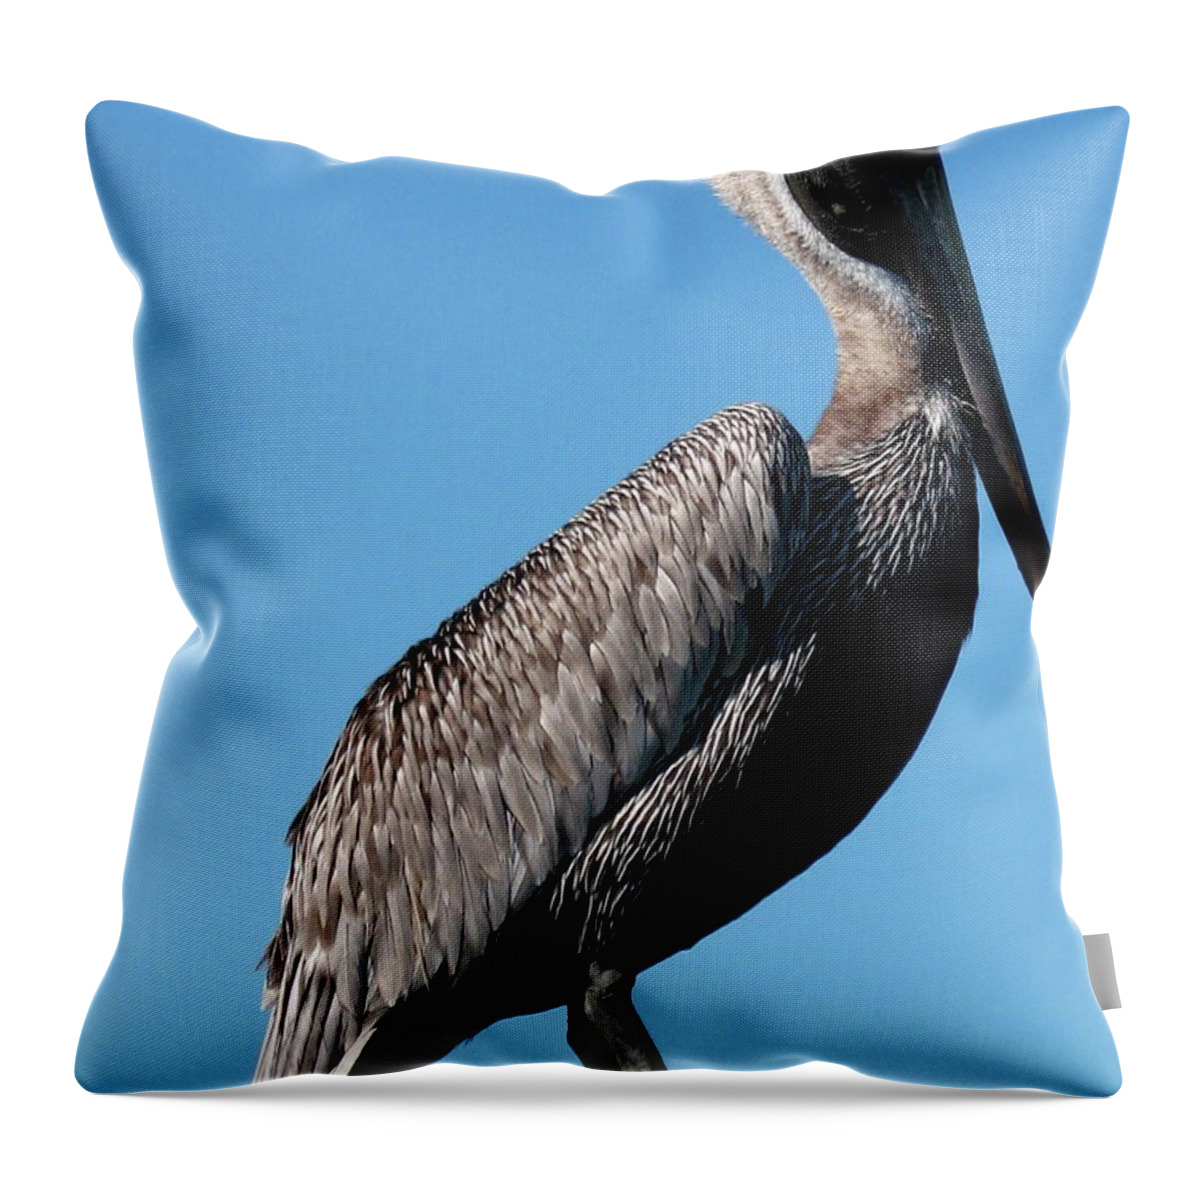 Pelican Throw Pillow featuring the photograph Pole With Pelican by Christiane Schulze Art And Photography